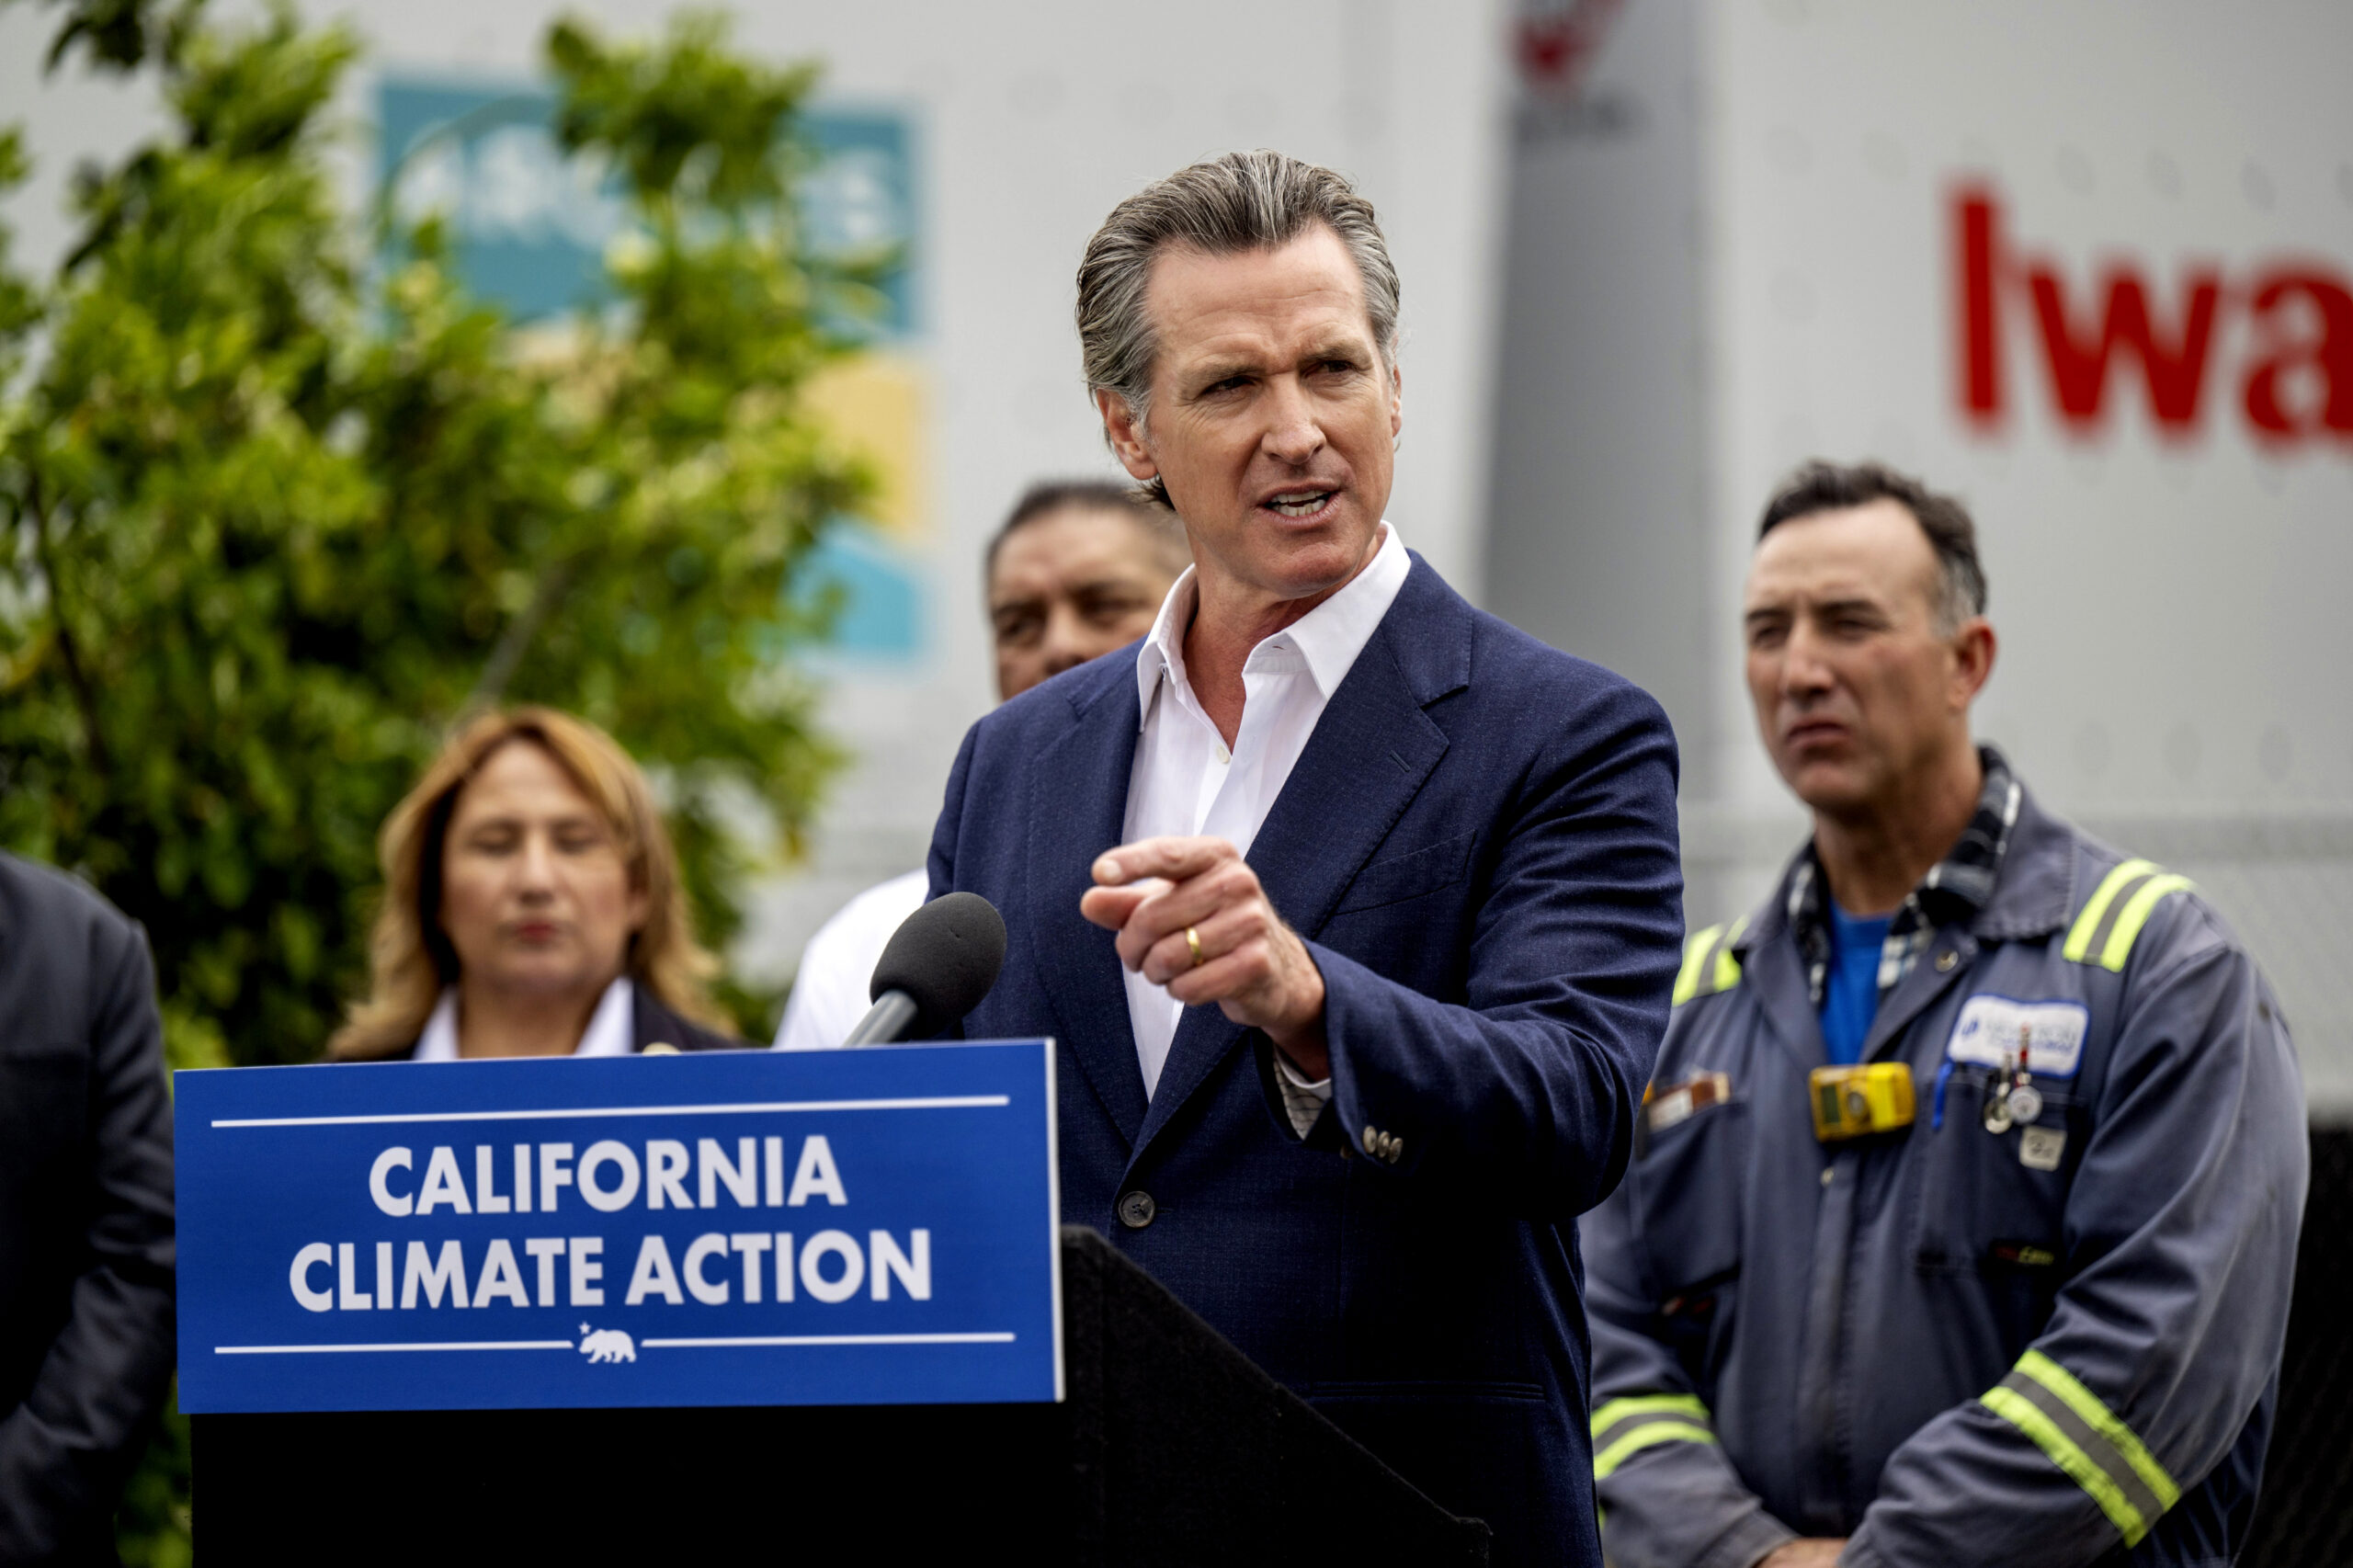 Insurance Crisis: Newsom Orders Action That Could Raise Rates